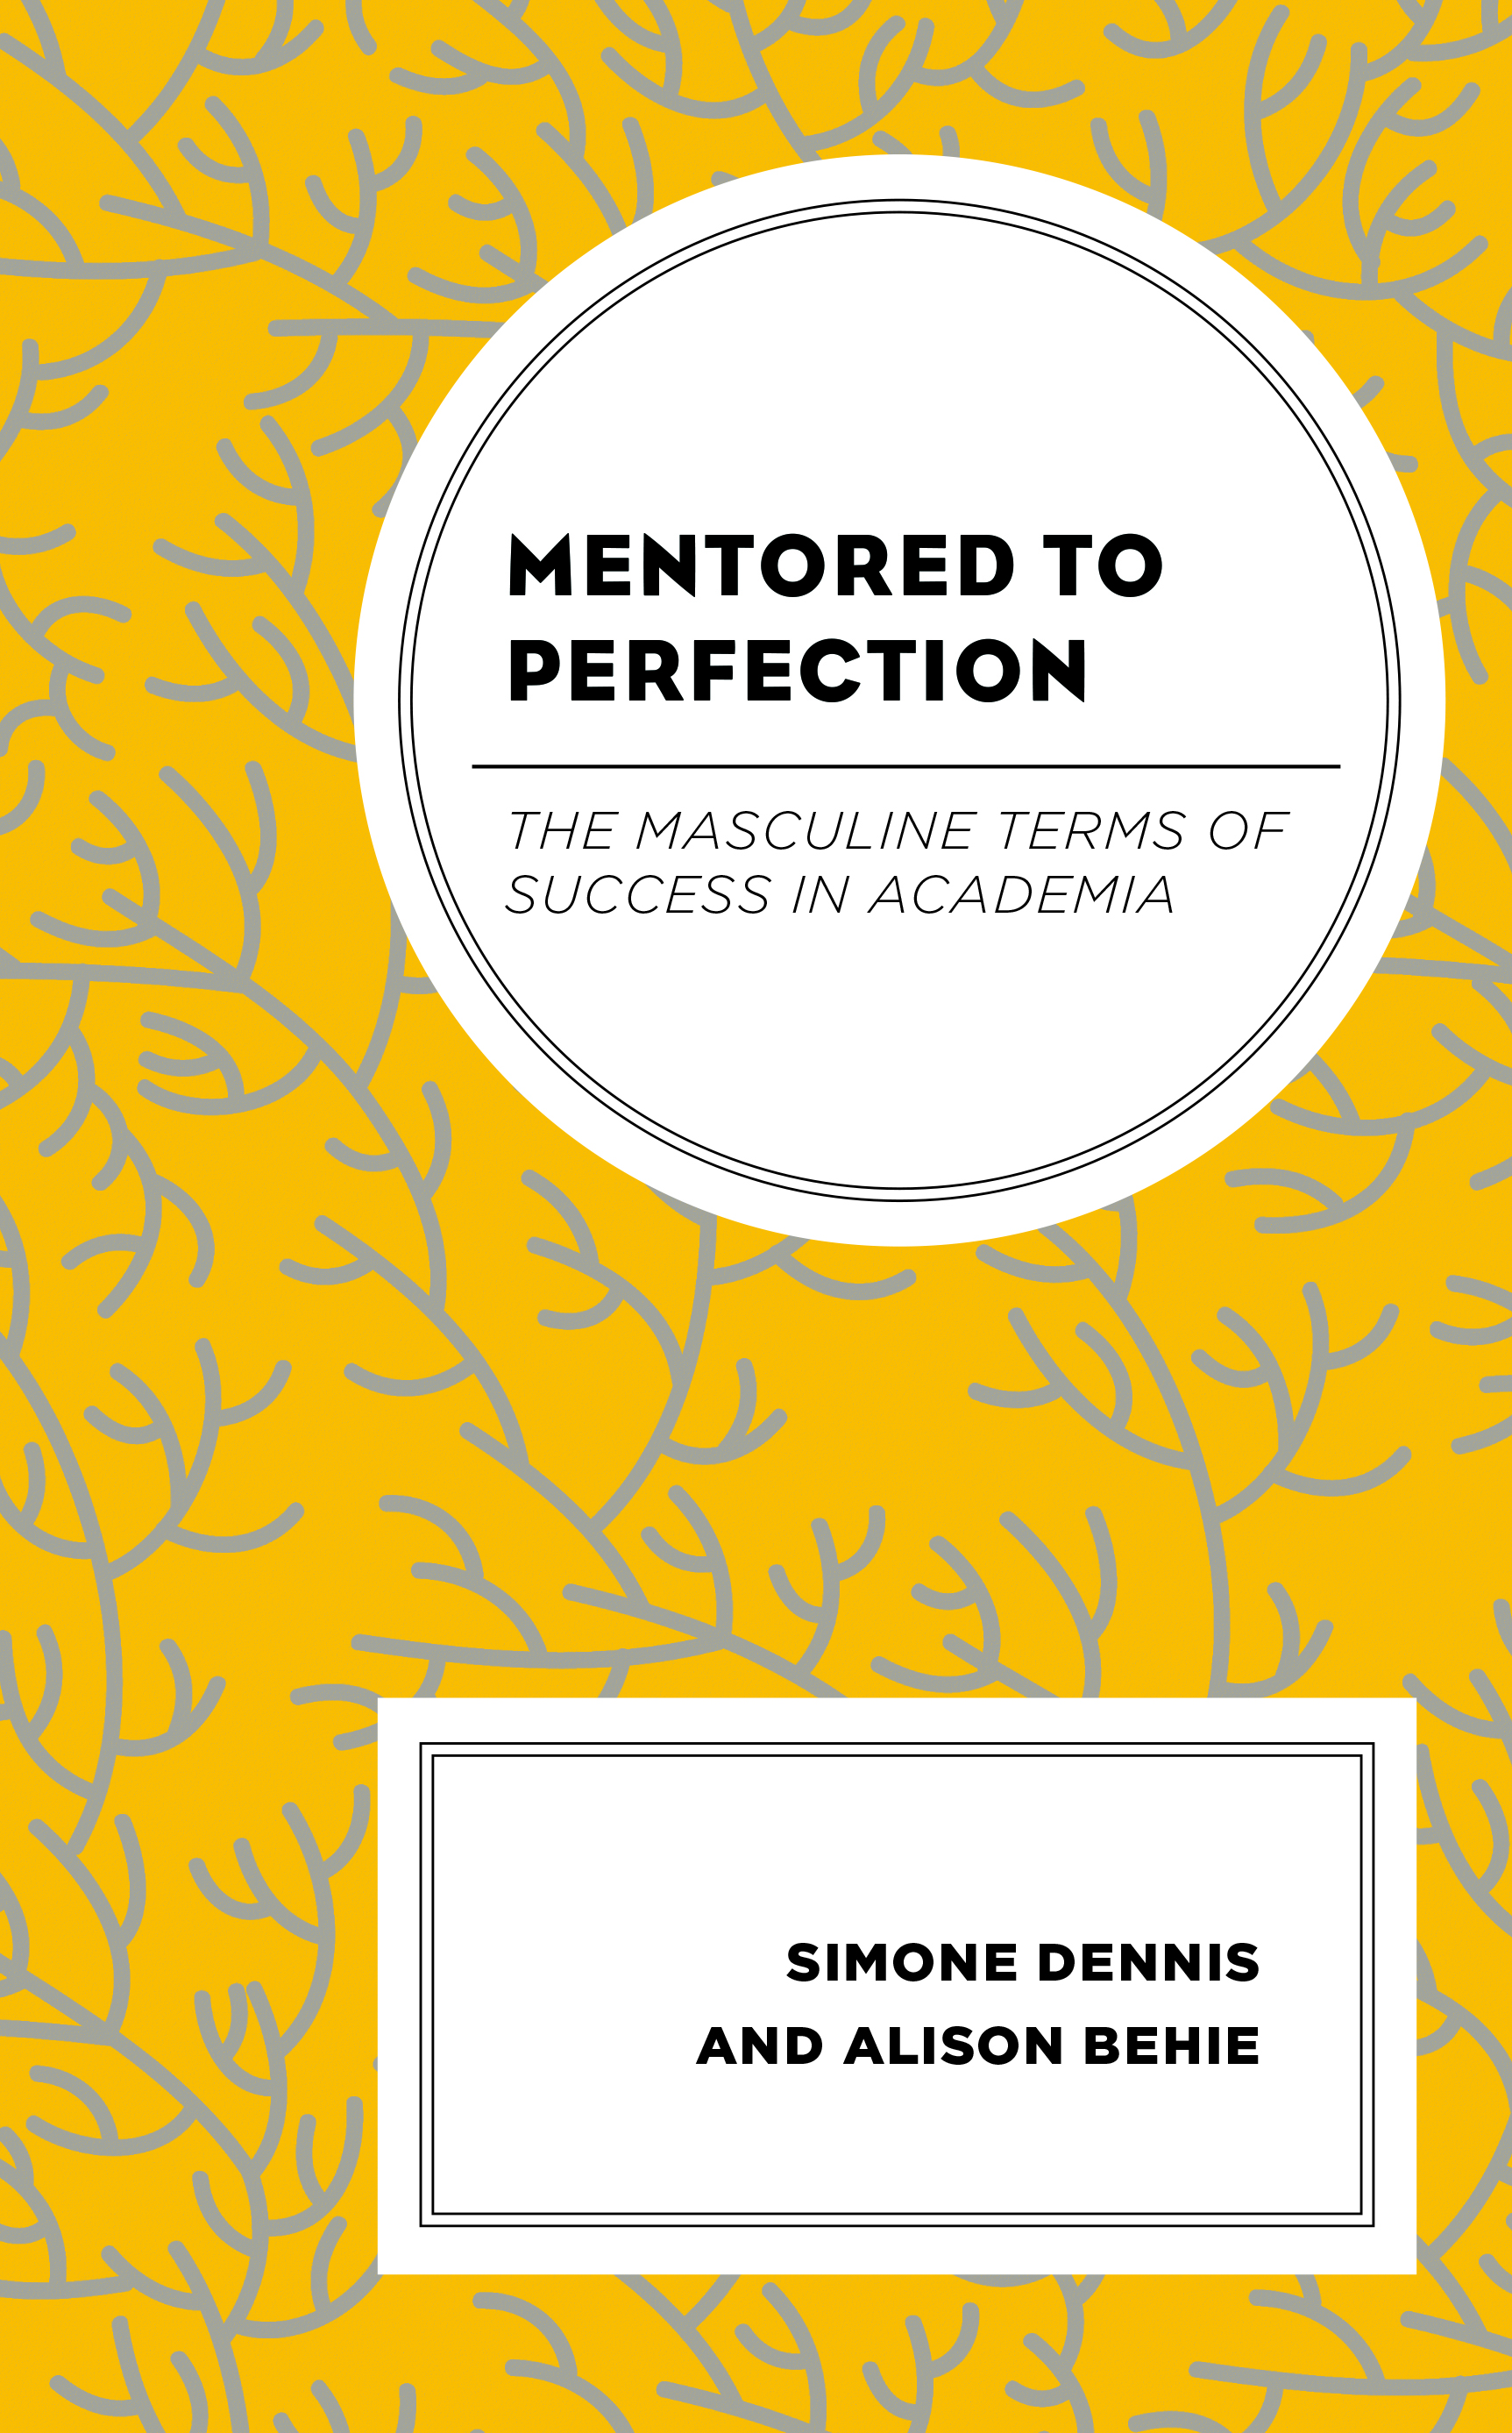 Mentored to Perfection: The Masculine Terms of Success in Academia